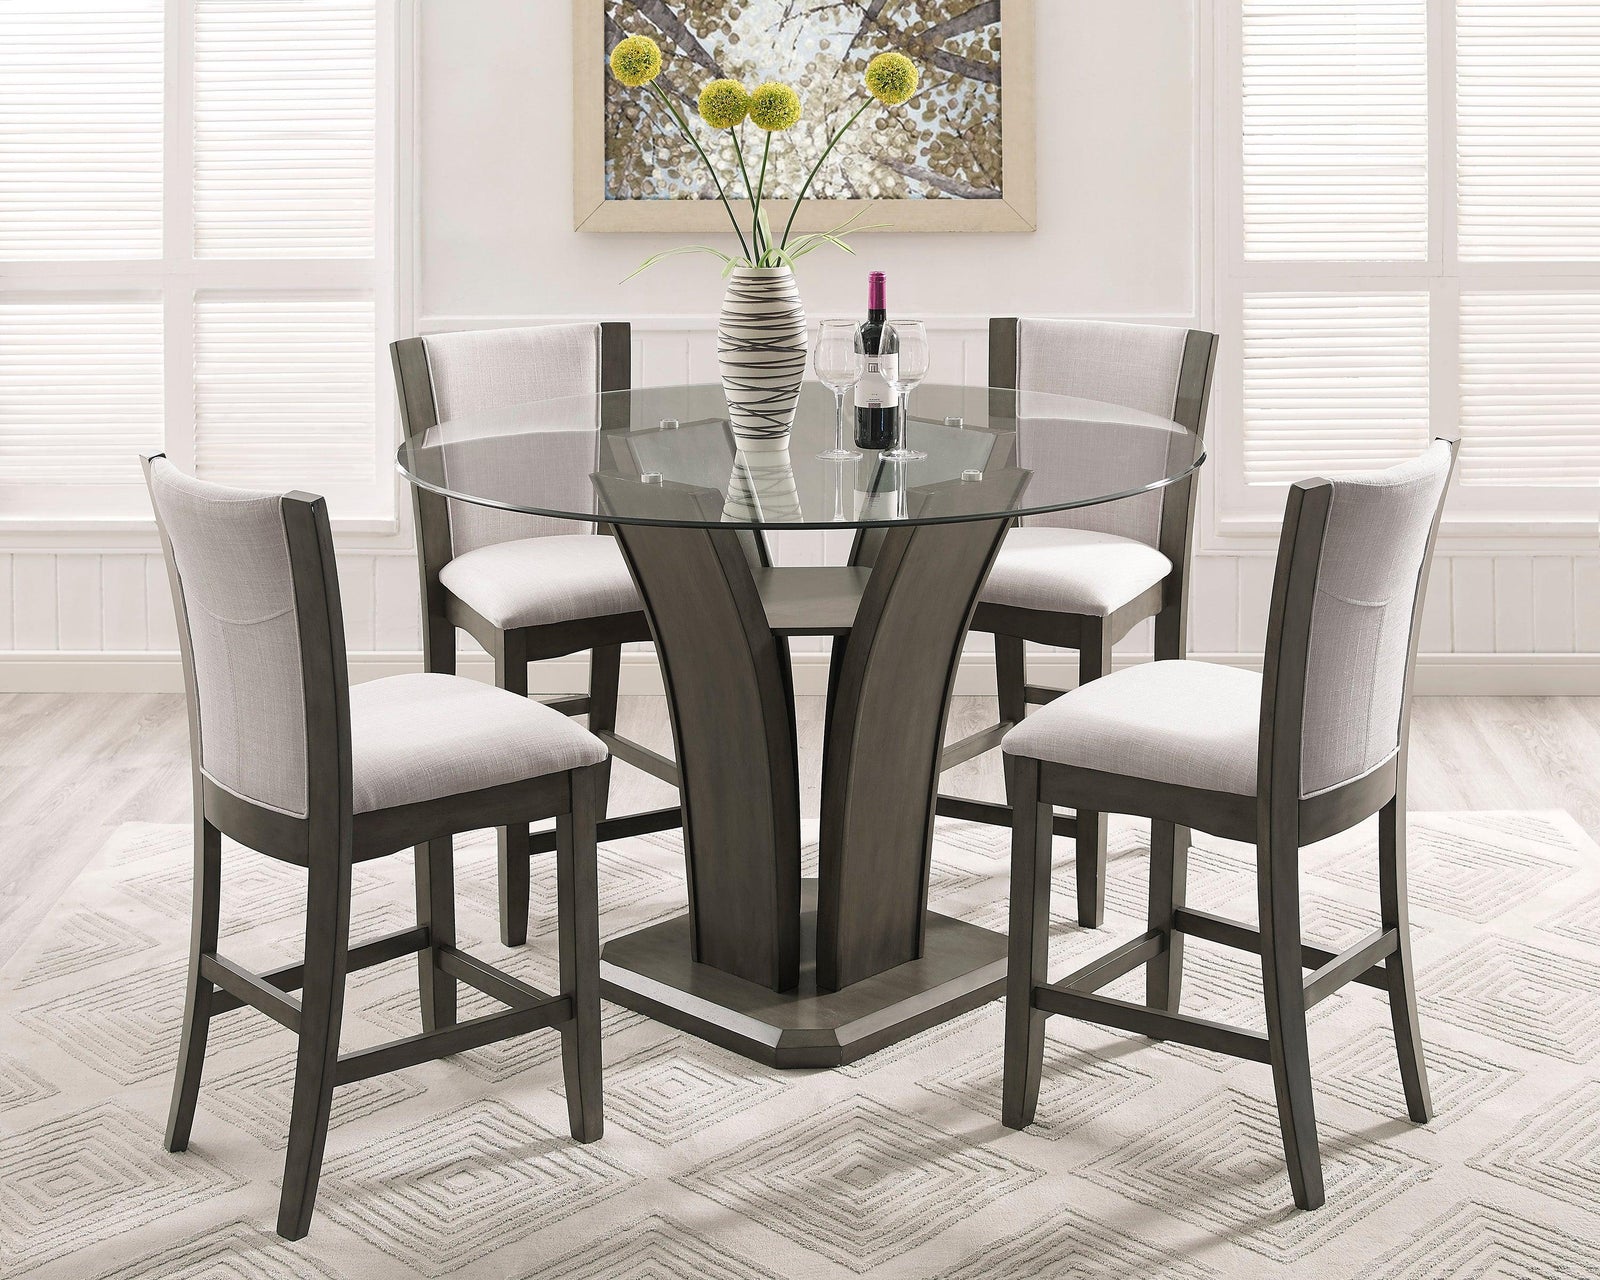 Camelia Gray Fabric Round Glass-top Counter Height Dining Room Set - Ella Furniture